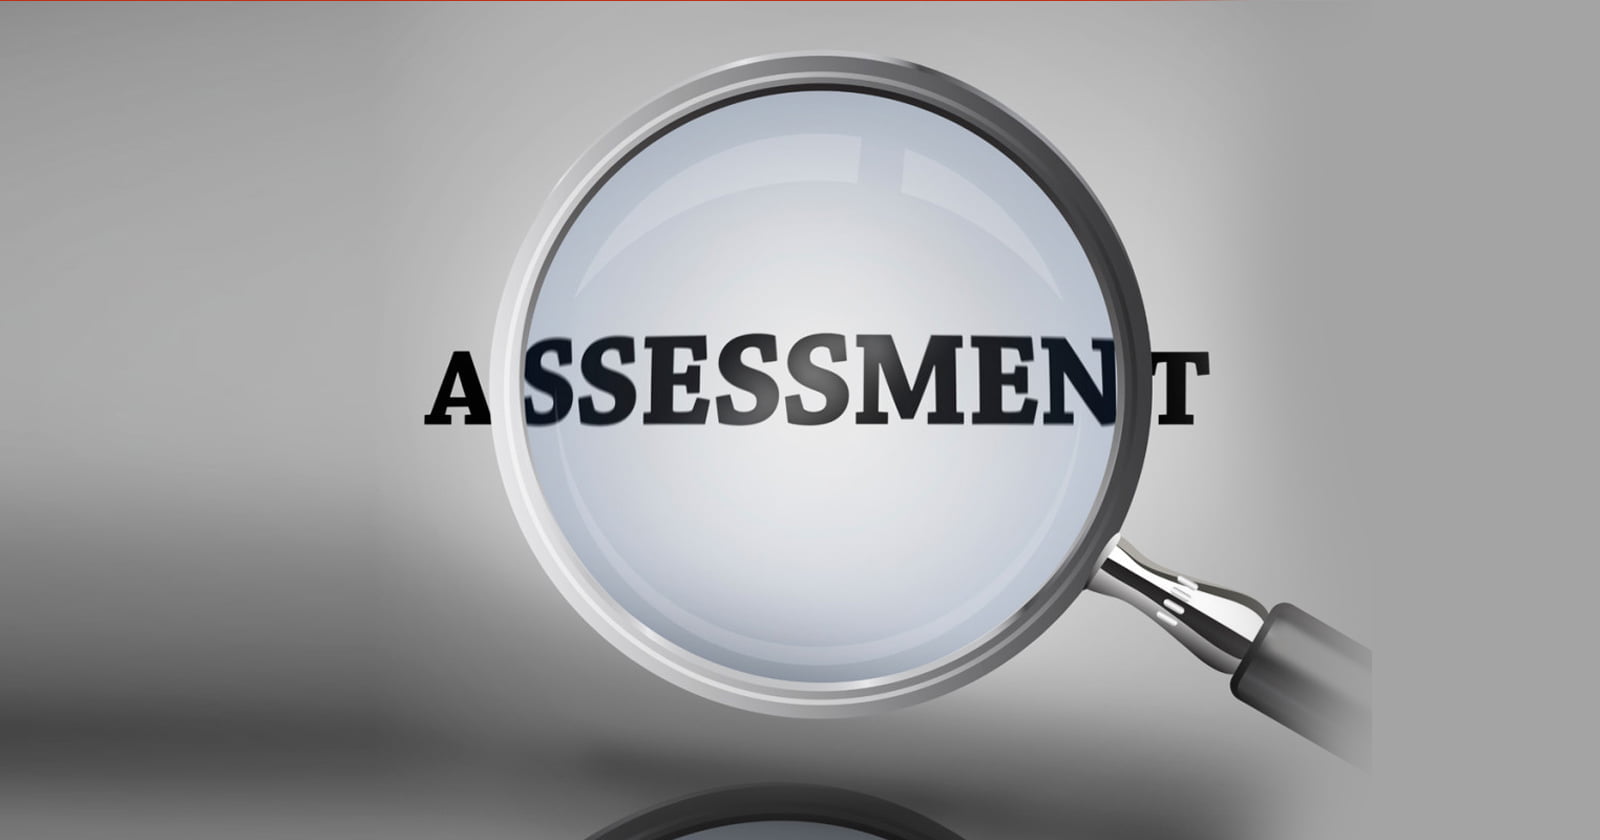 Material Found from Premises - Third Parties cannot be utilized - assessee for making Assessment - ITAT -TAXSCAN